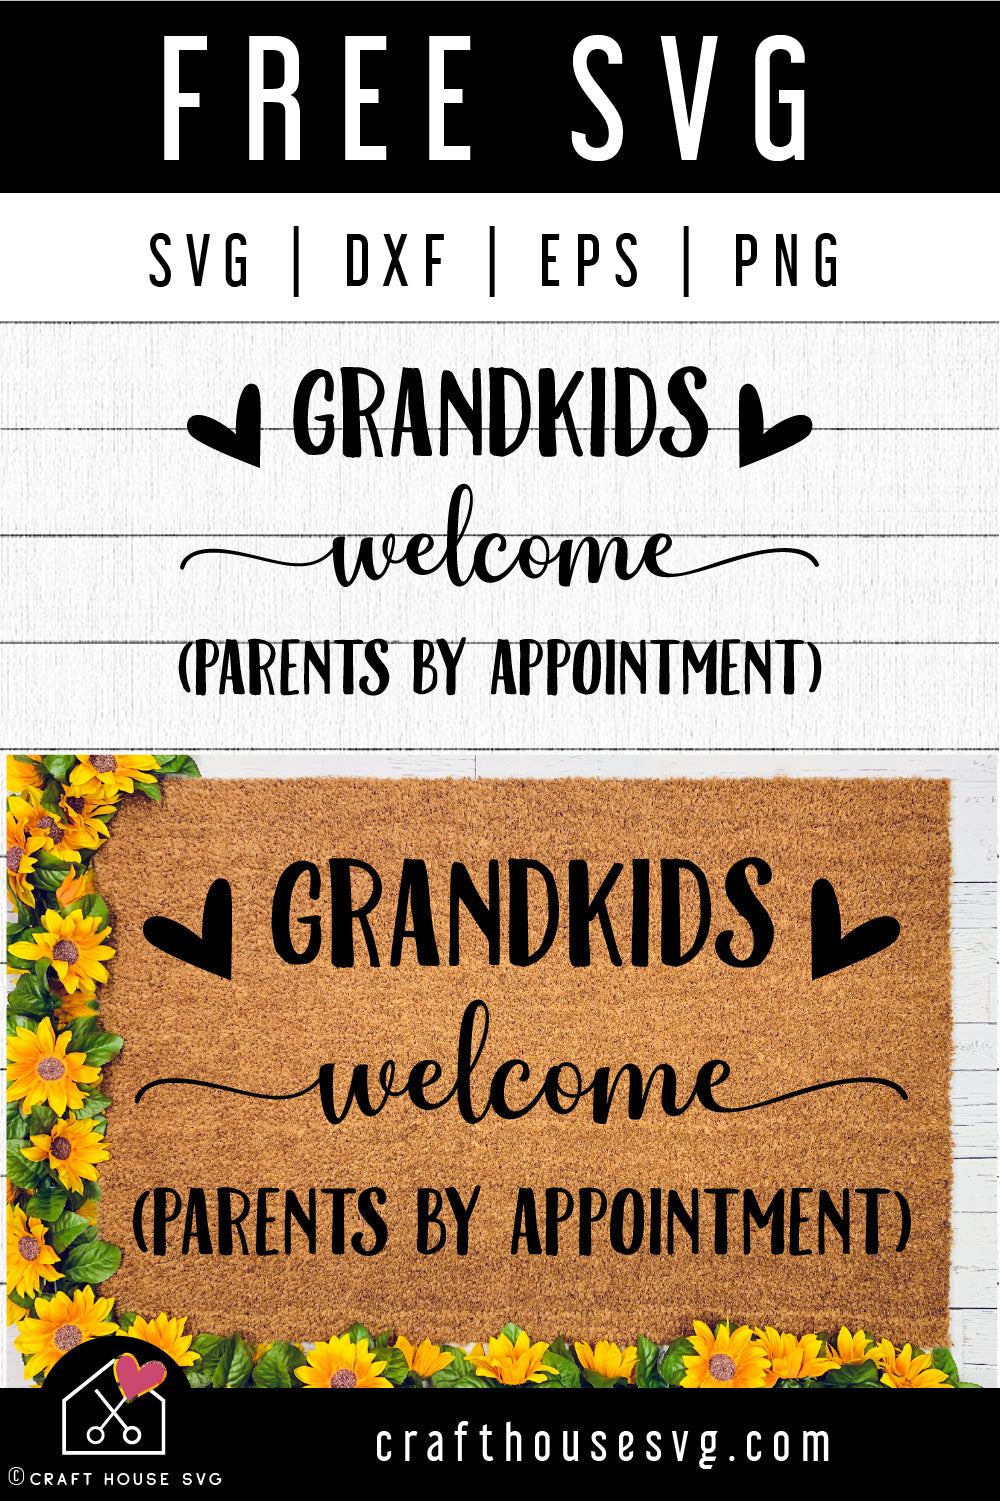 FREE Grandkids welcome parents by appointment SVG Funny Grandparents Doormat Cut File